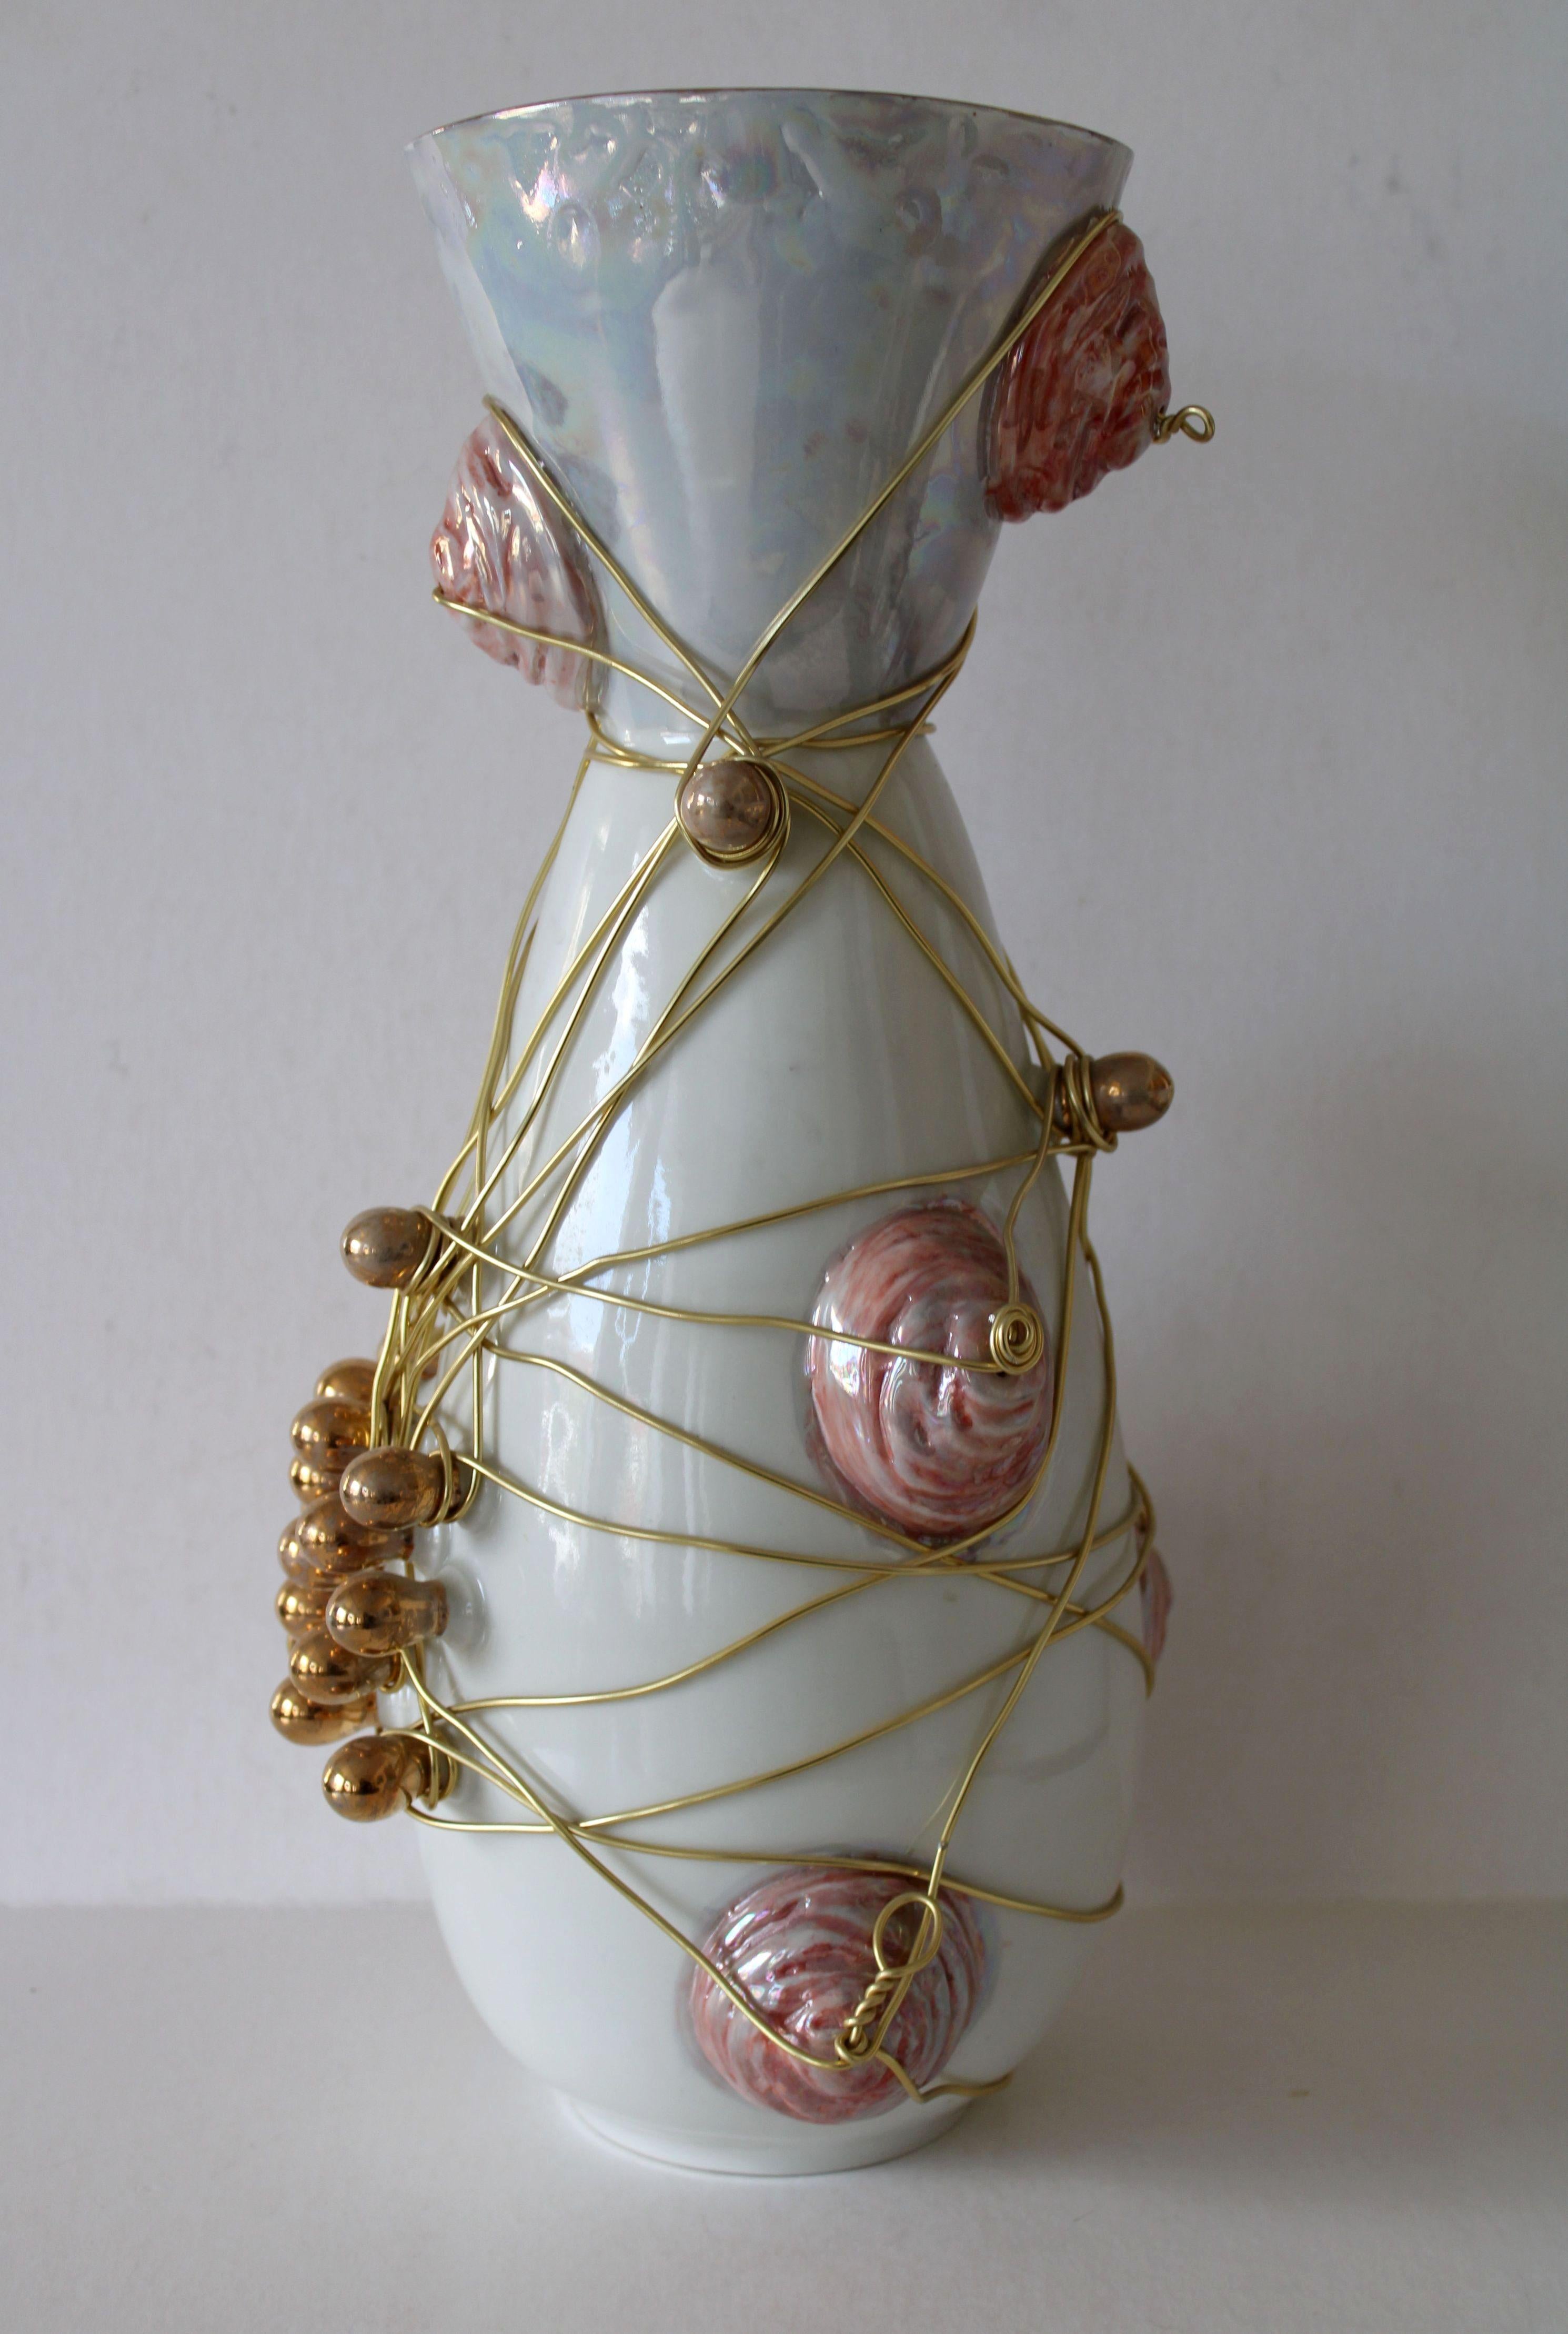 Vases with wires - set of two  2009, porcelain, wire, h 19.5 cm, h 43 cm For Sale 9